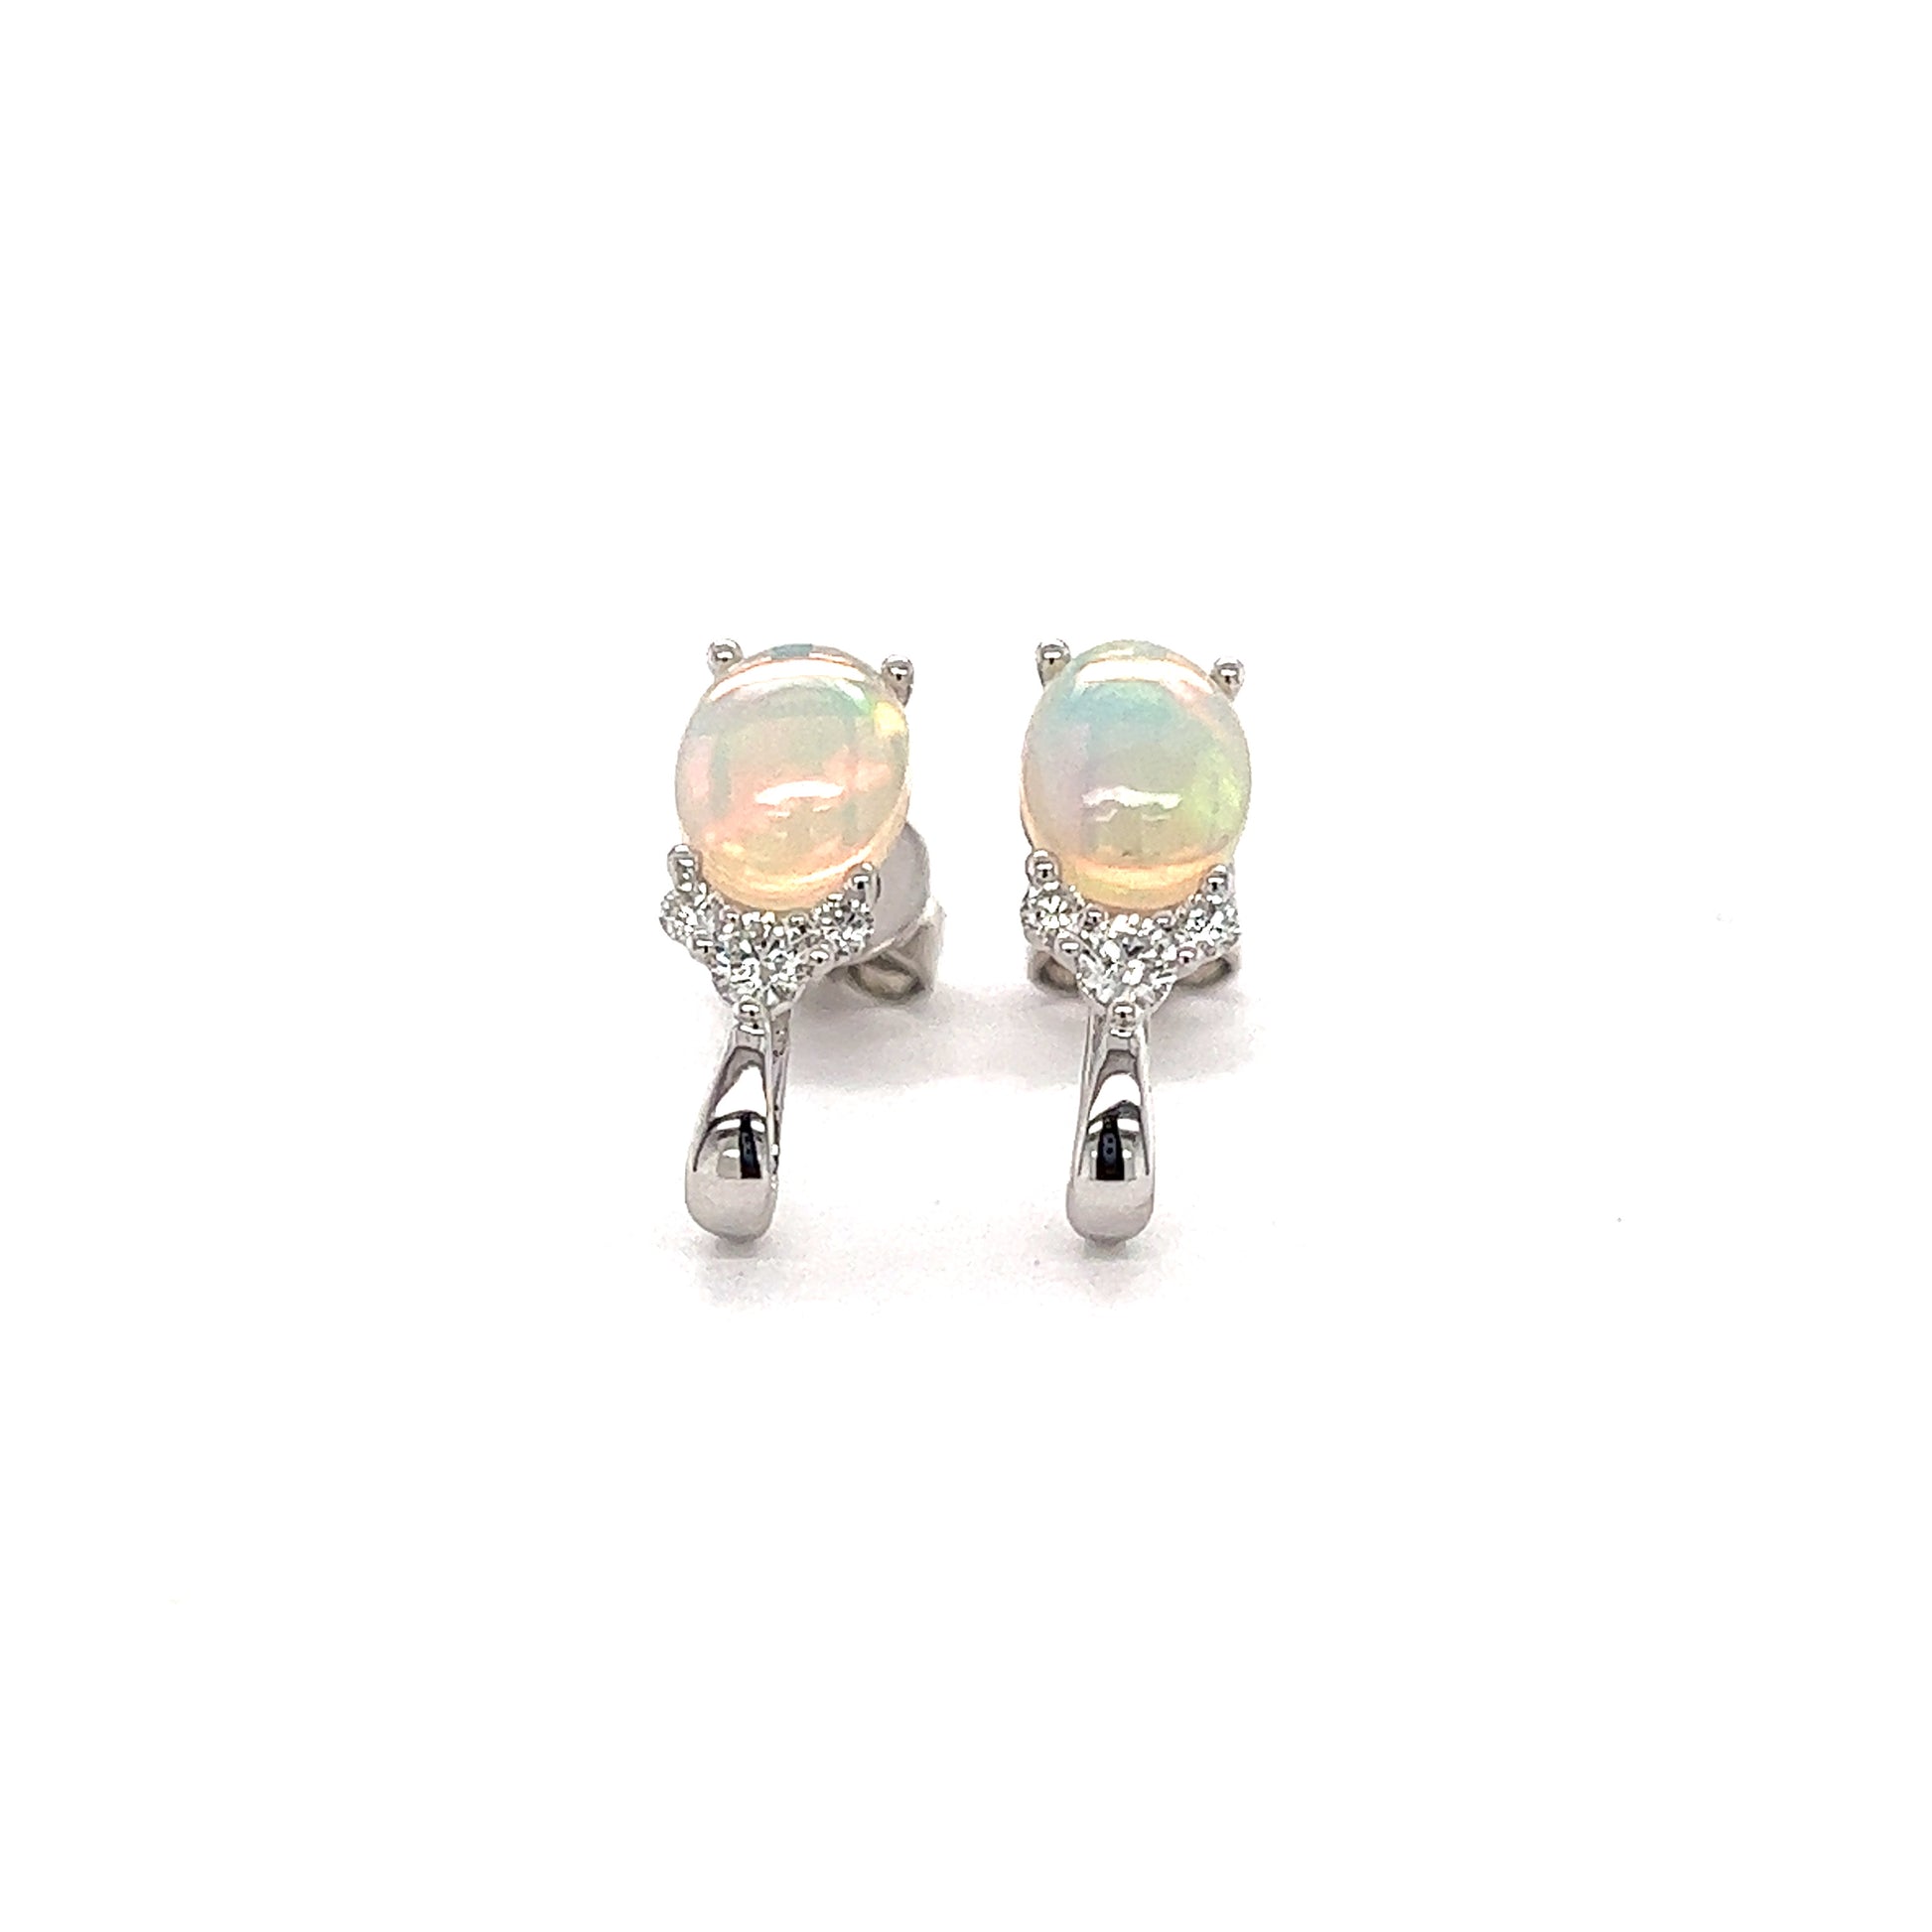 White Ethiopian Opal Stud Earrings with Accent Diamonds in 14K White Gold Front View